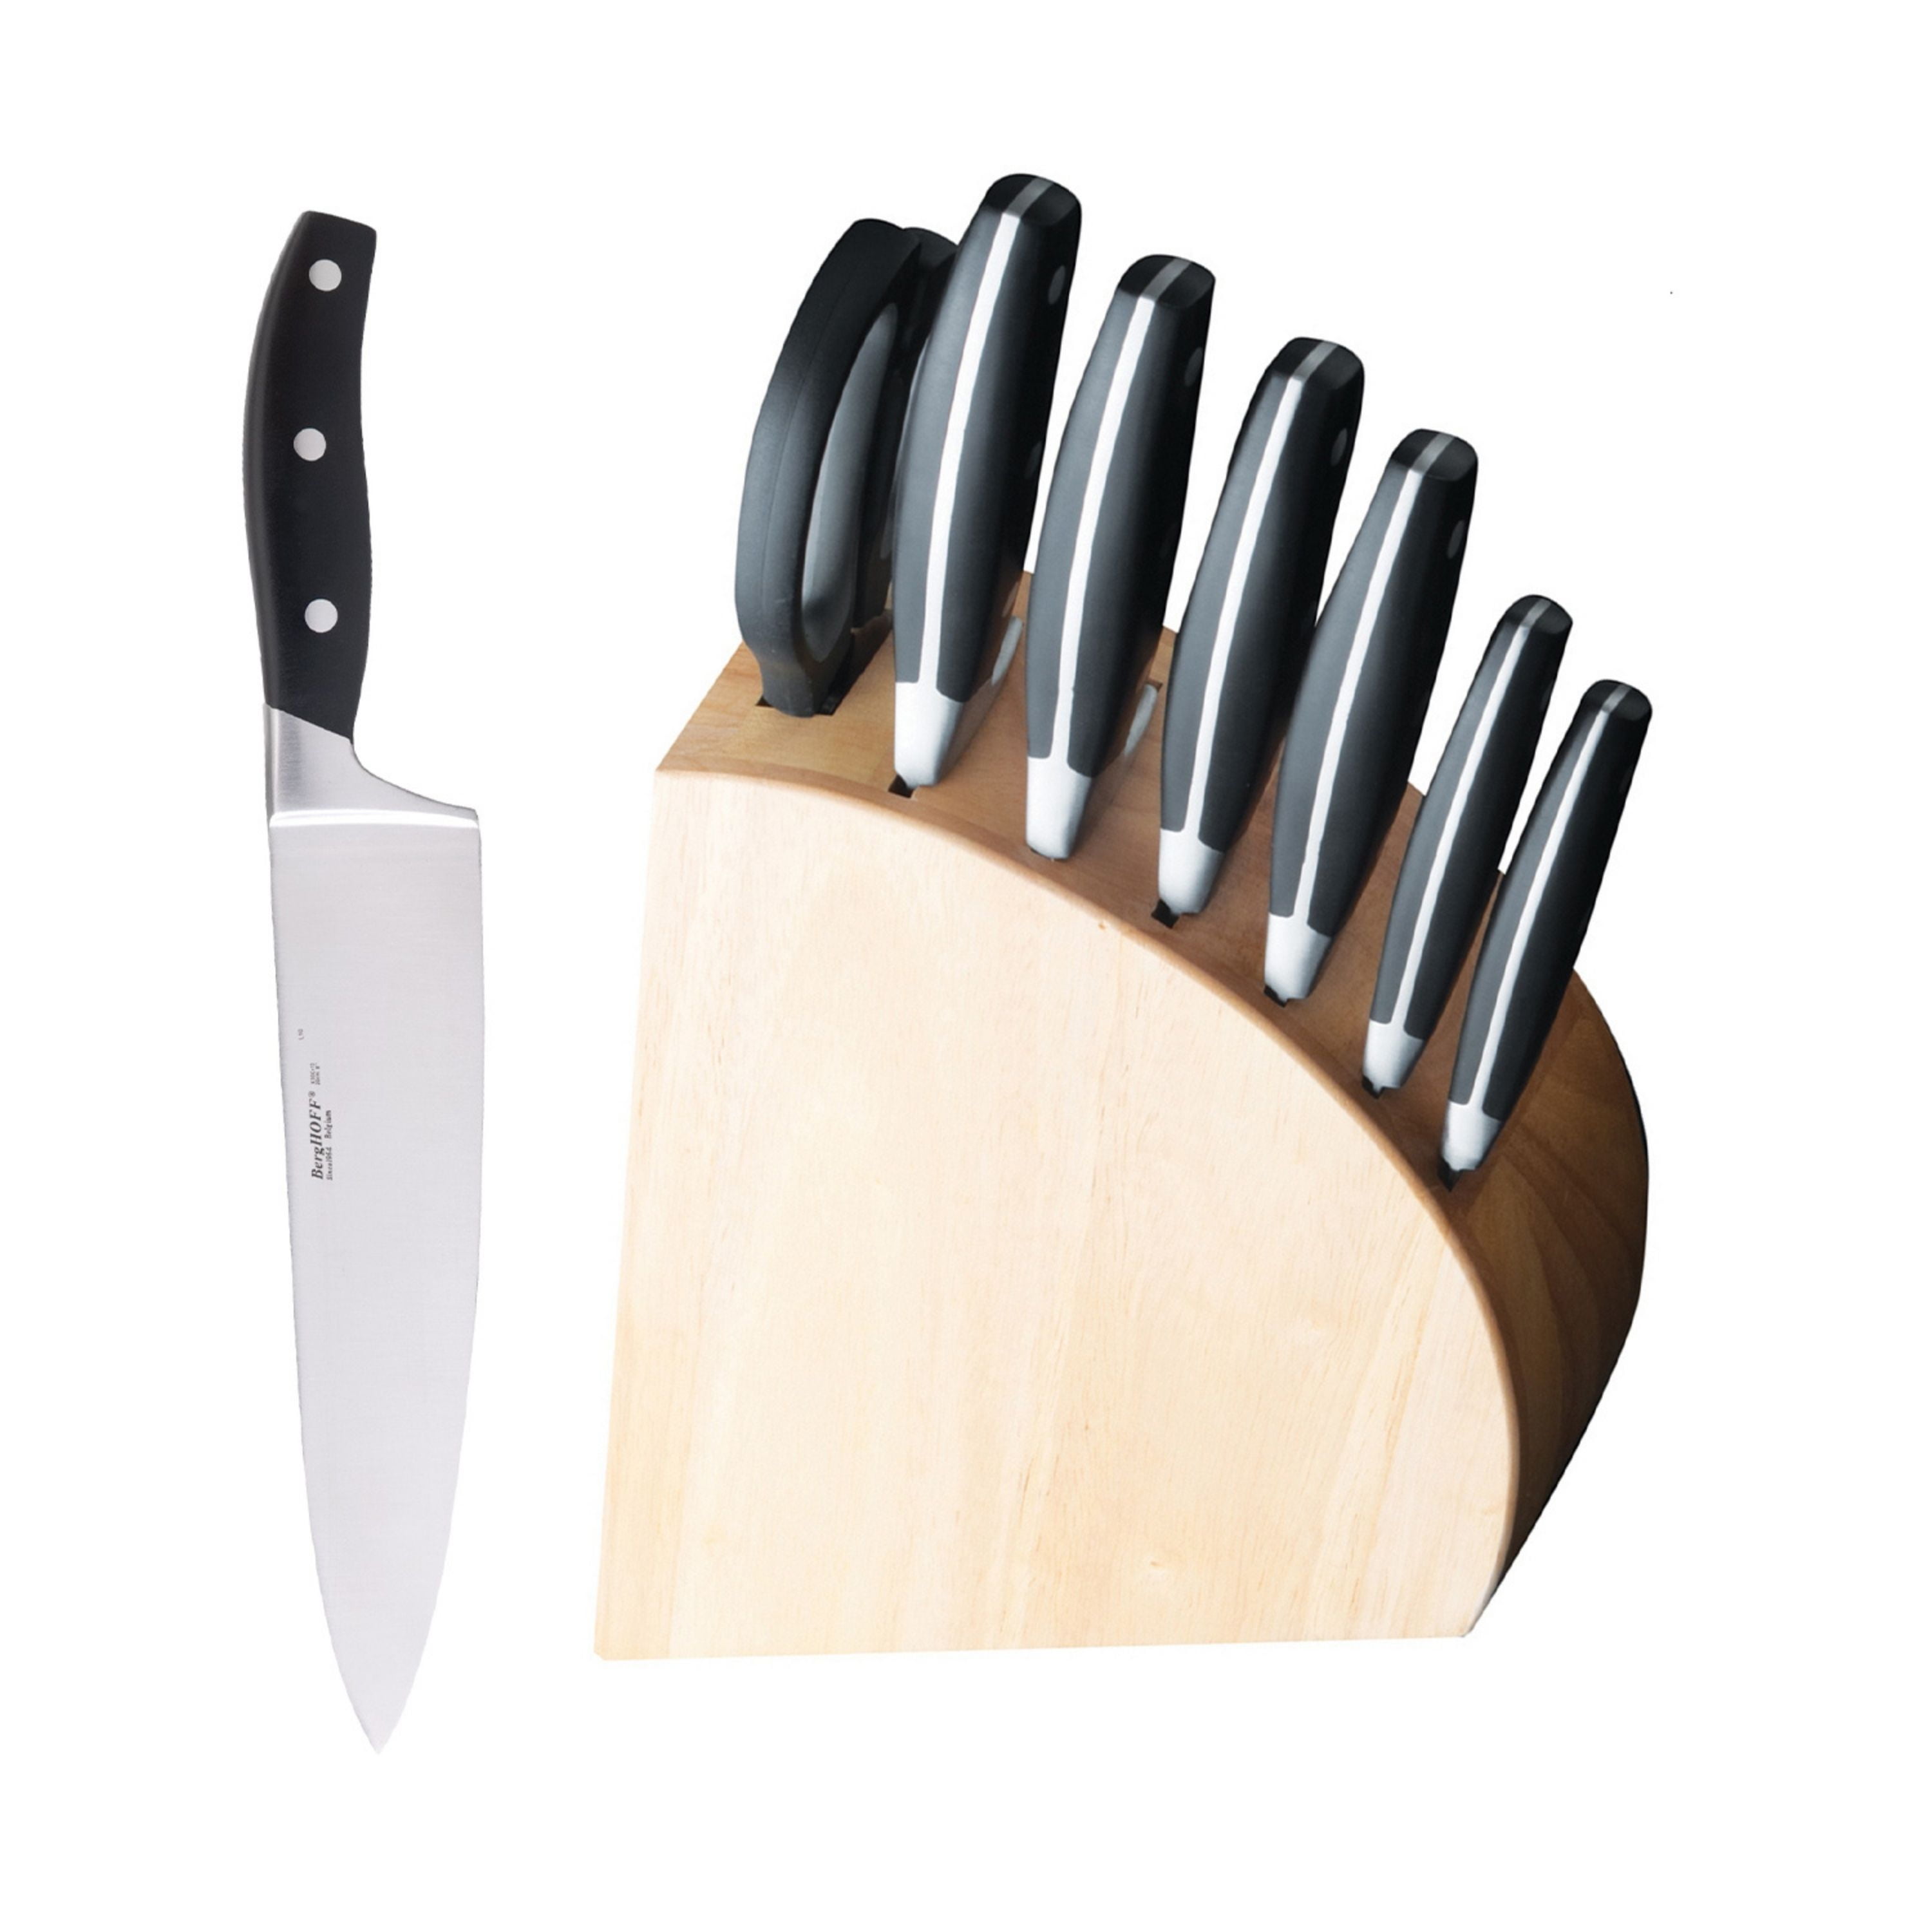 Big Green Egg Culinary Chef Knife Set (4 piece) with Case - German Steel  Knives, 8” Chef Knife, Santoku Knife, Slicing Knife, and Paring Knife. Best